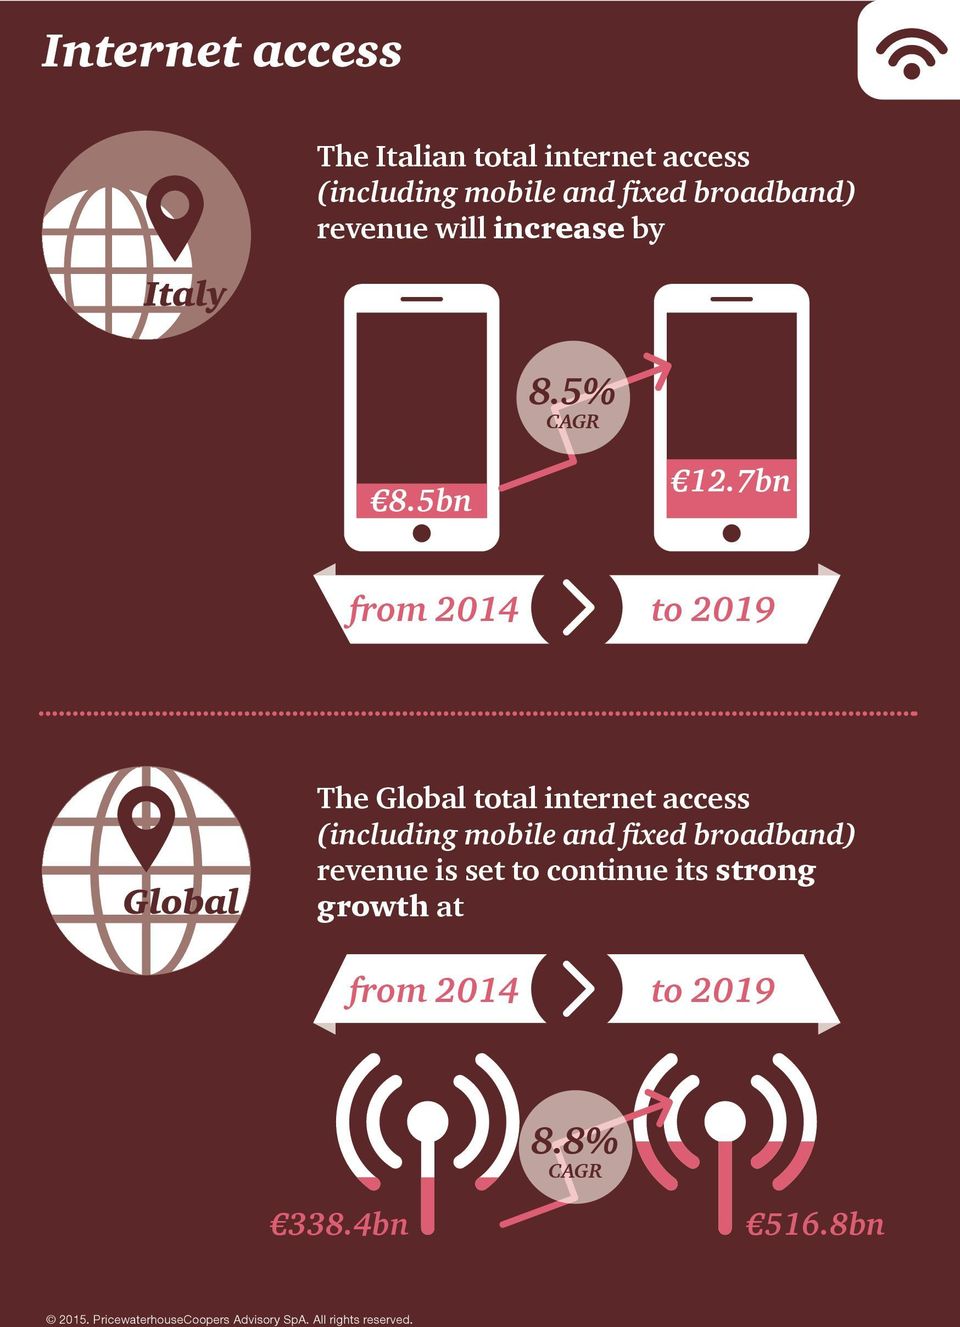 7bn from 2014 to 2019 The Global total internet access (including mobile